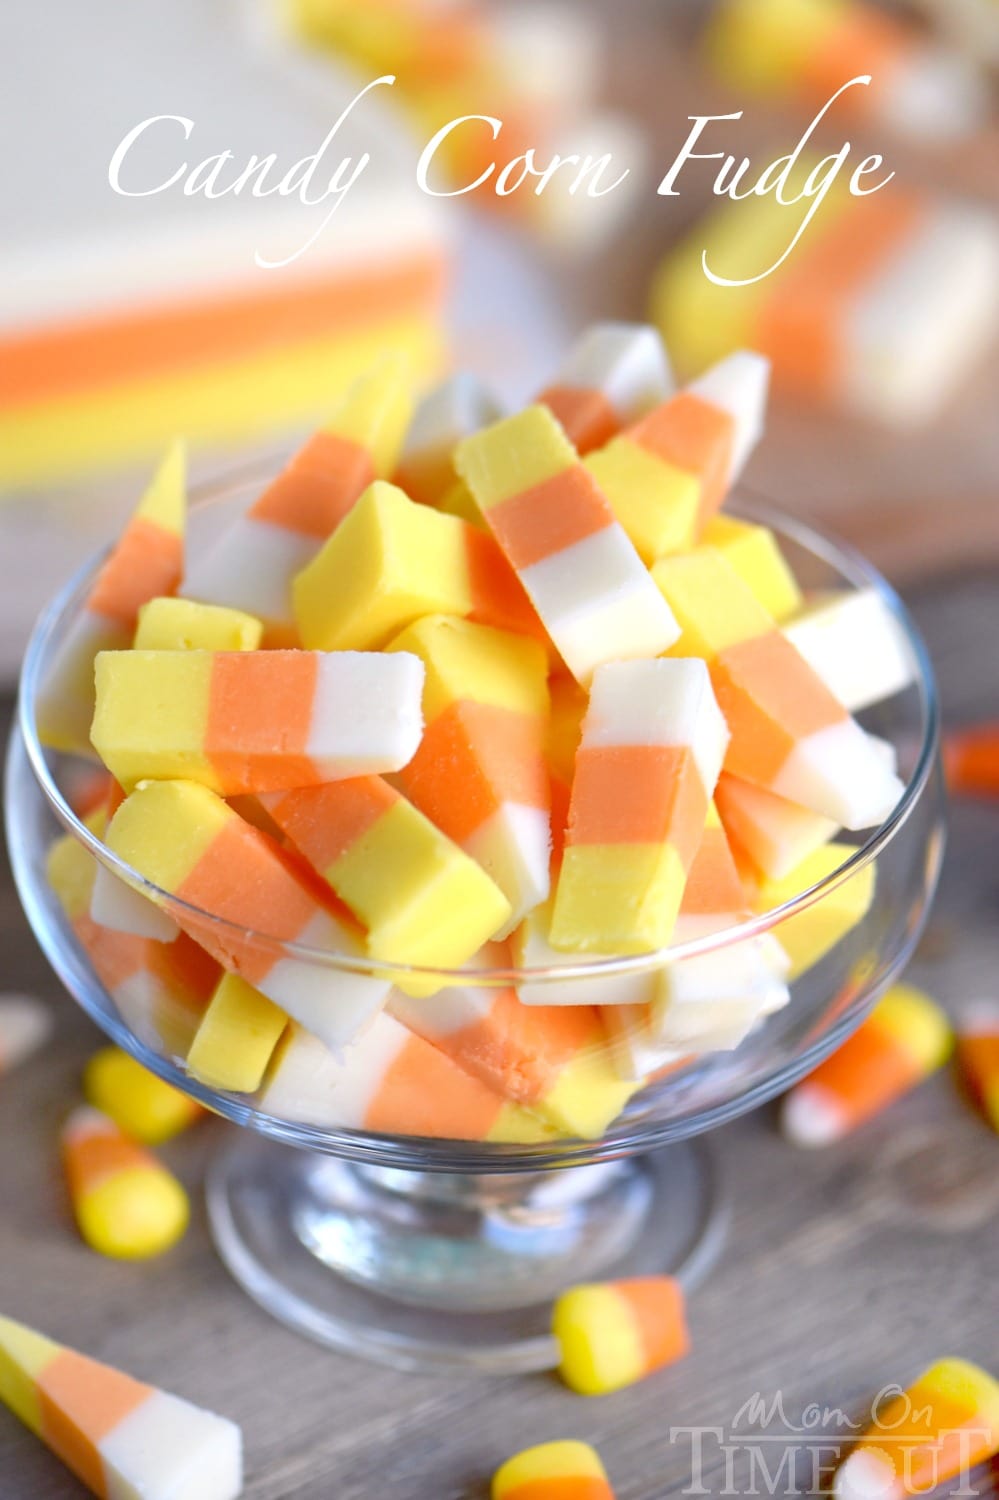 Candy Corn Fudge Video This Easy Candy Corn Fudge recipe is going to become an annual tradition! Layers of